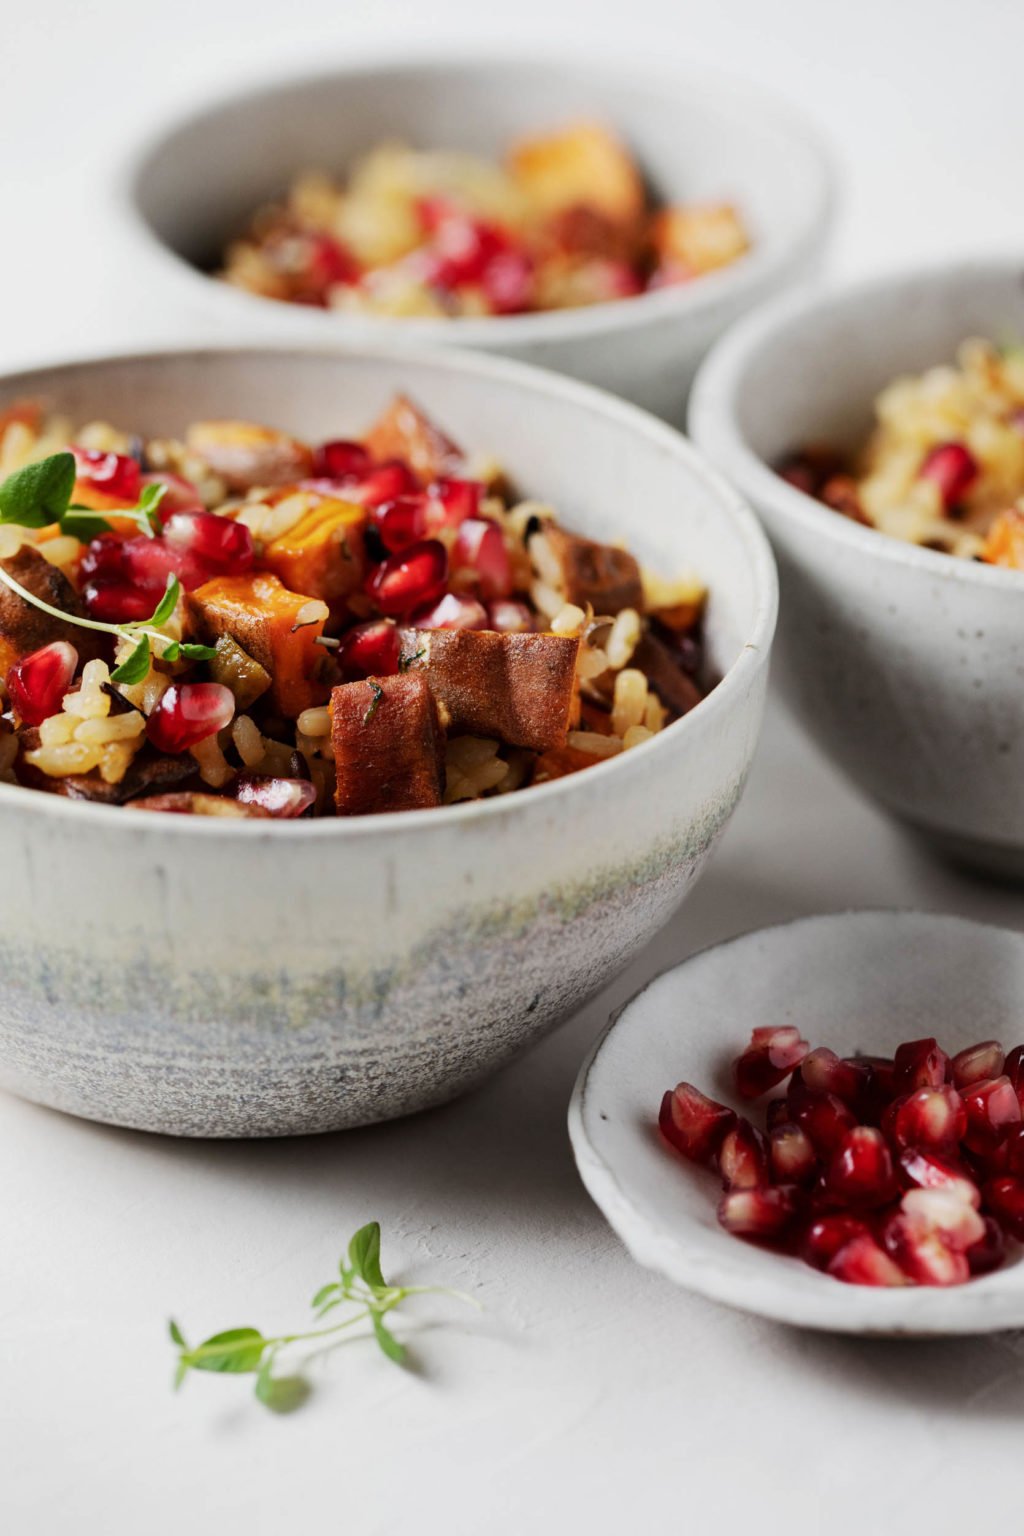 Several bowls contain the ingredients for a vegan rice and sweet potato holiday side dish.